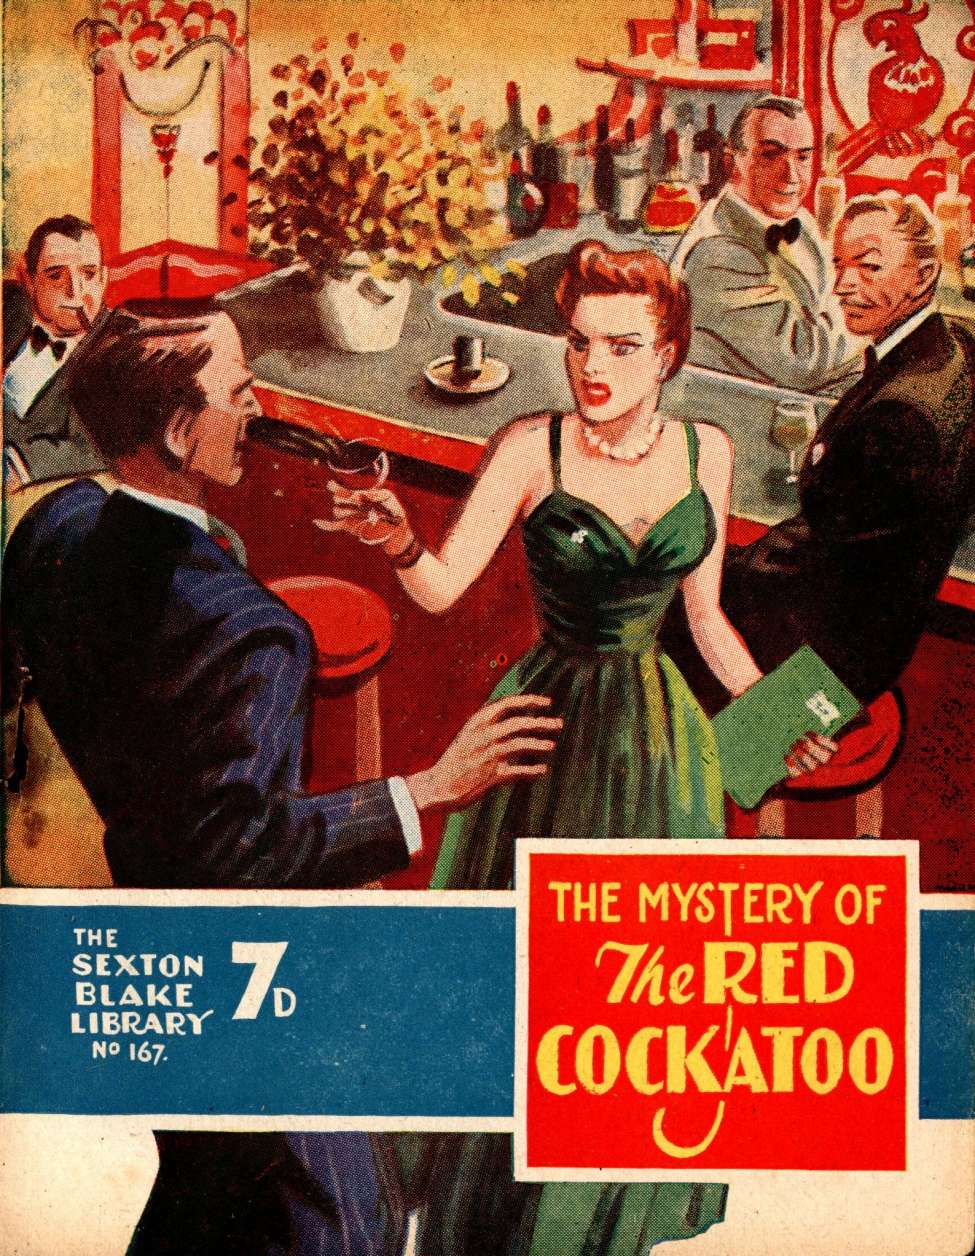 Book Cover For Sexton Blake Library S3 167 - The Mystery of the Red Cockatoo